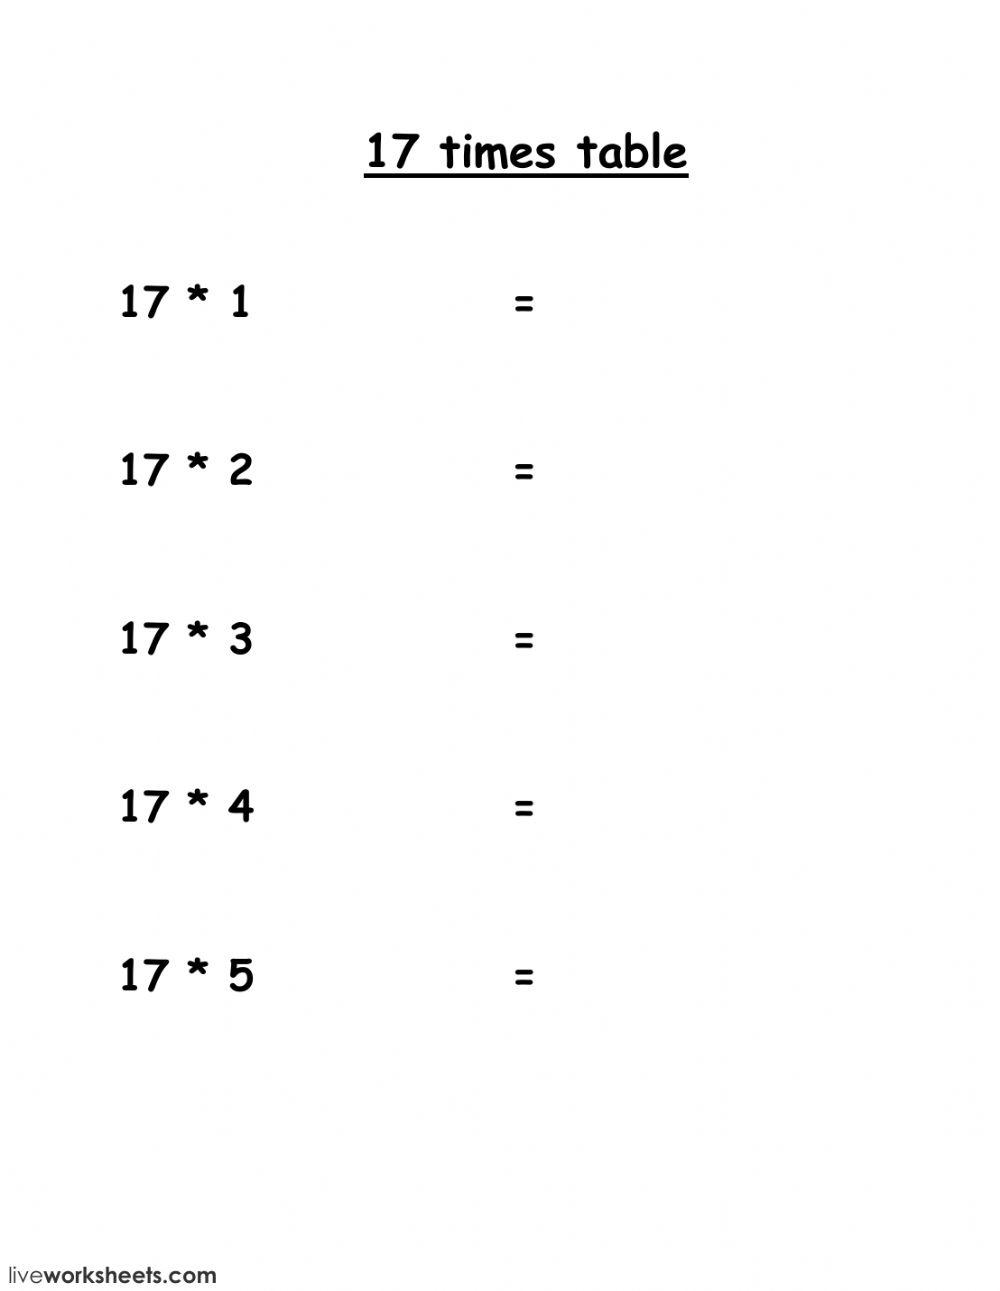 17 times table